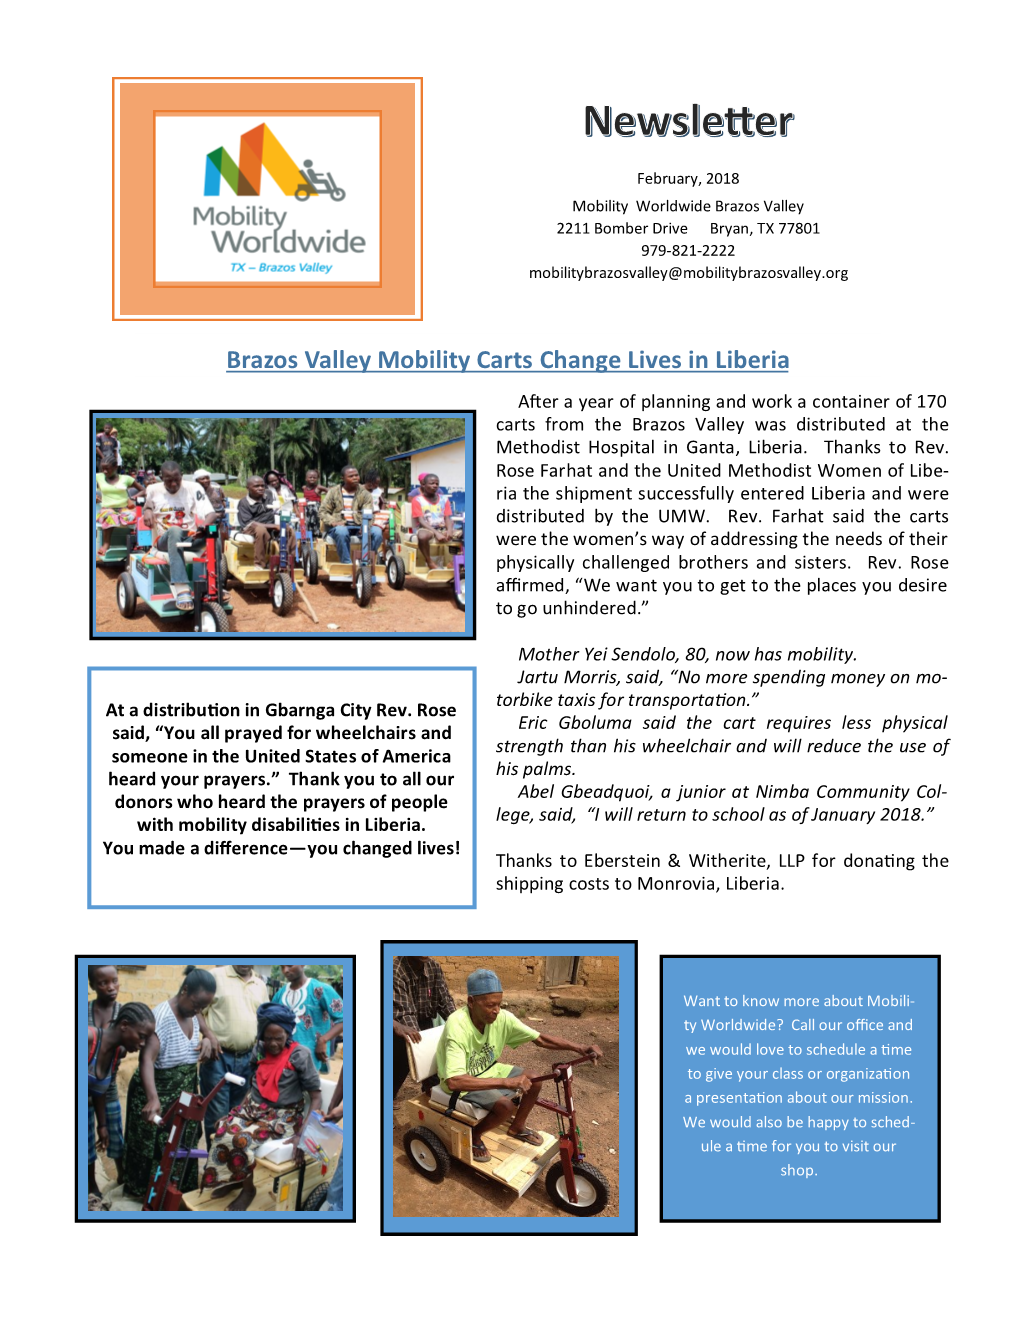 Brazos Valley Mobility Carts Change Lives in Liberia